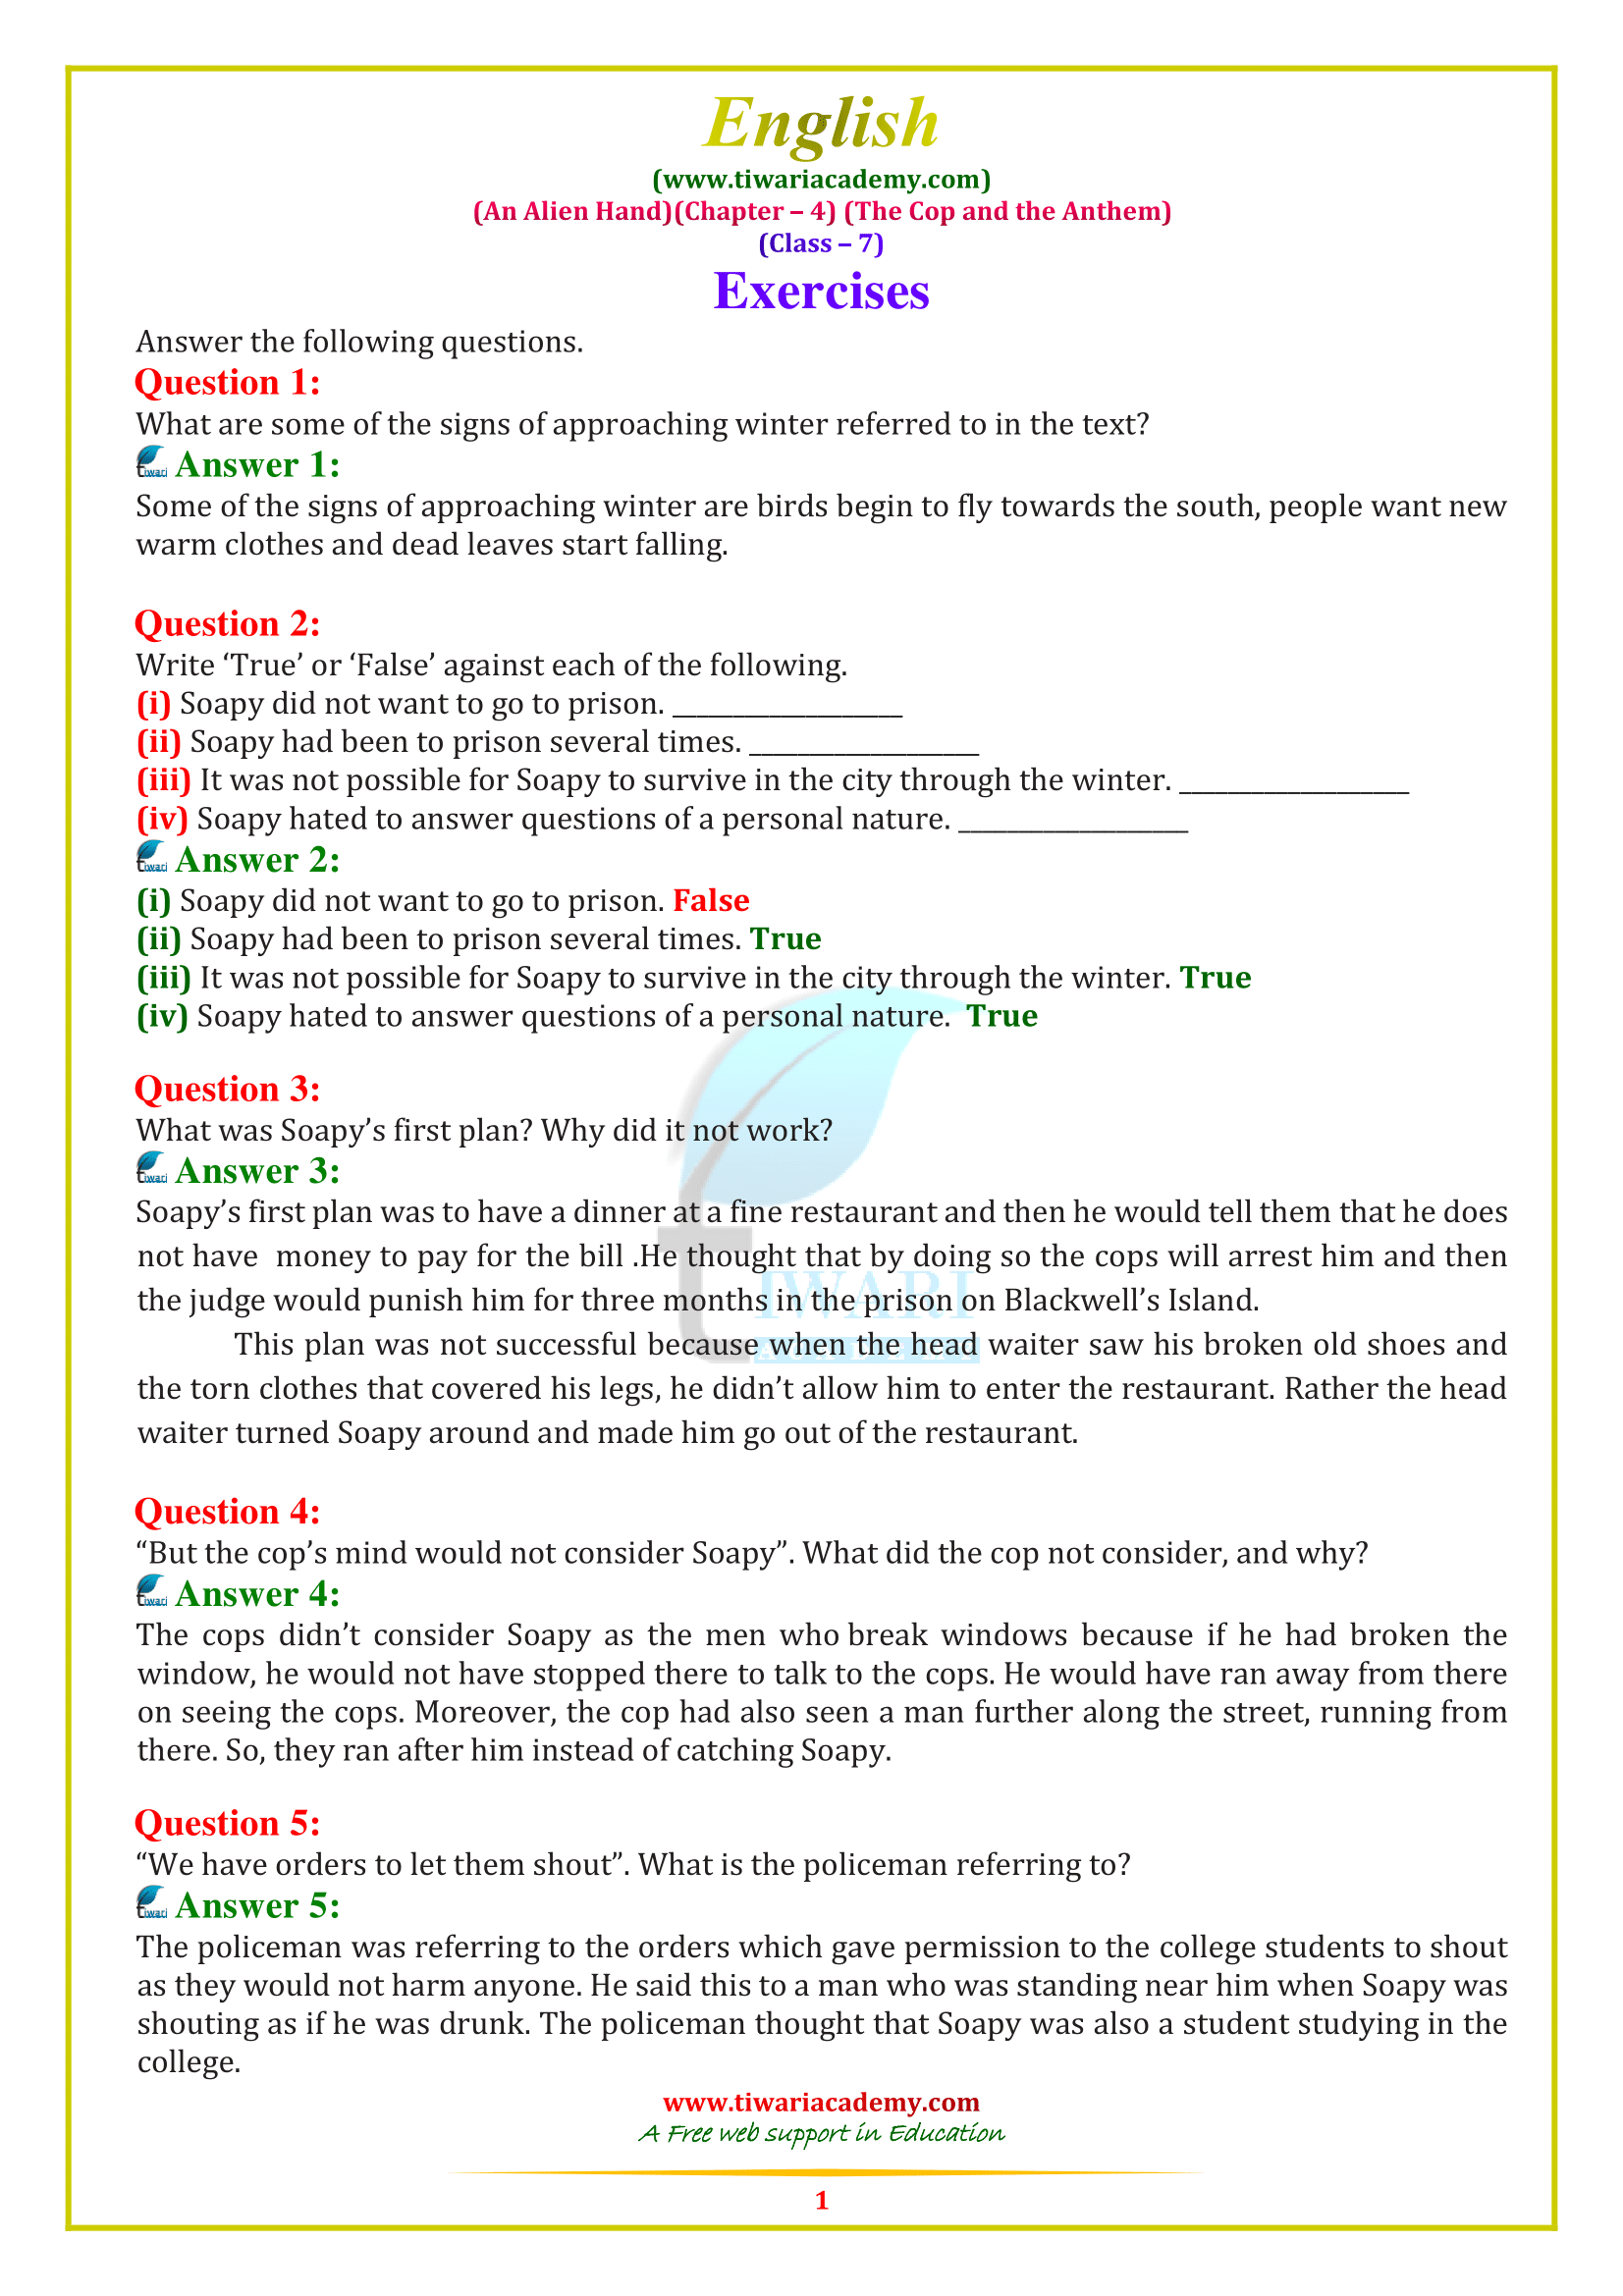 Class 7 English Chapter 4: The Cop and the Anthem - Answers